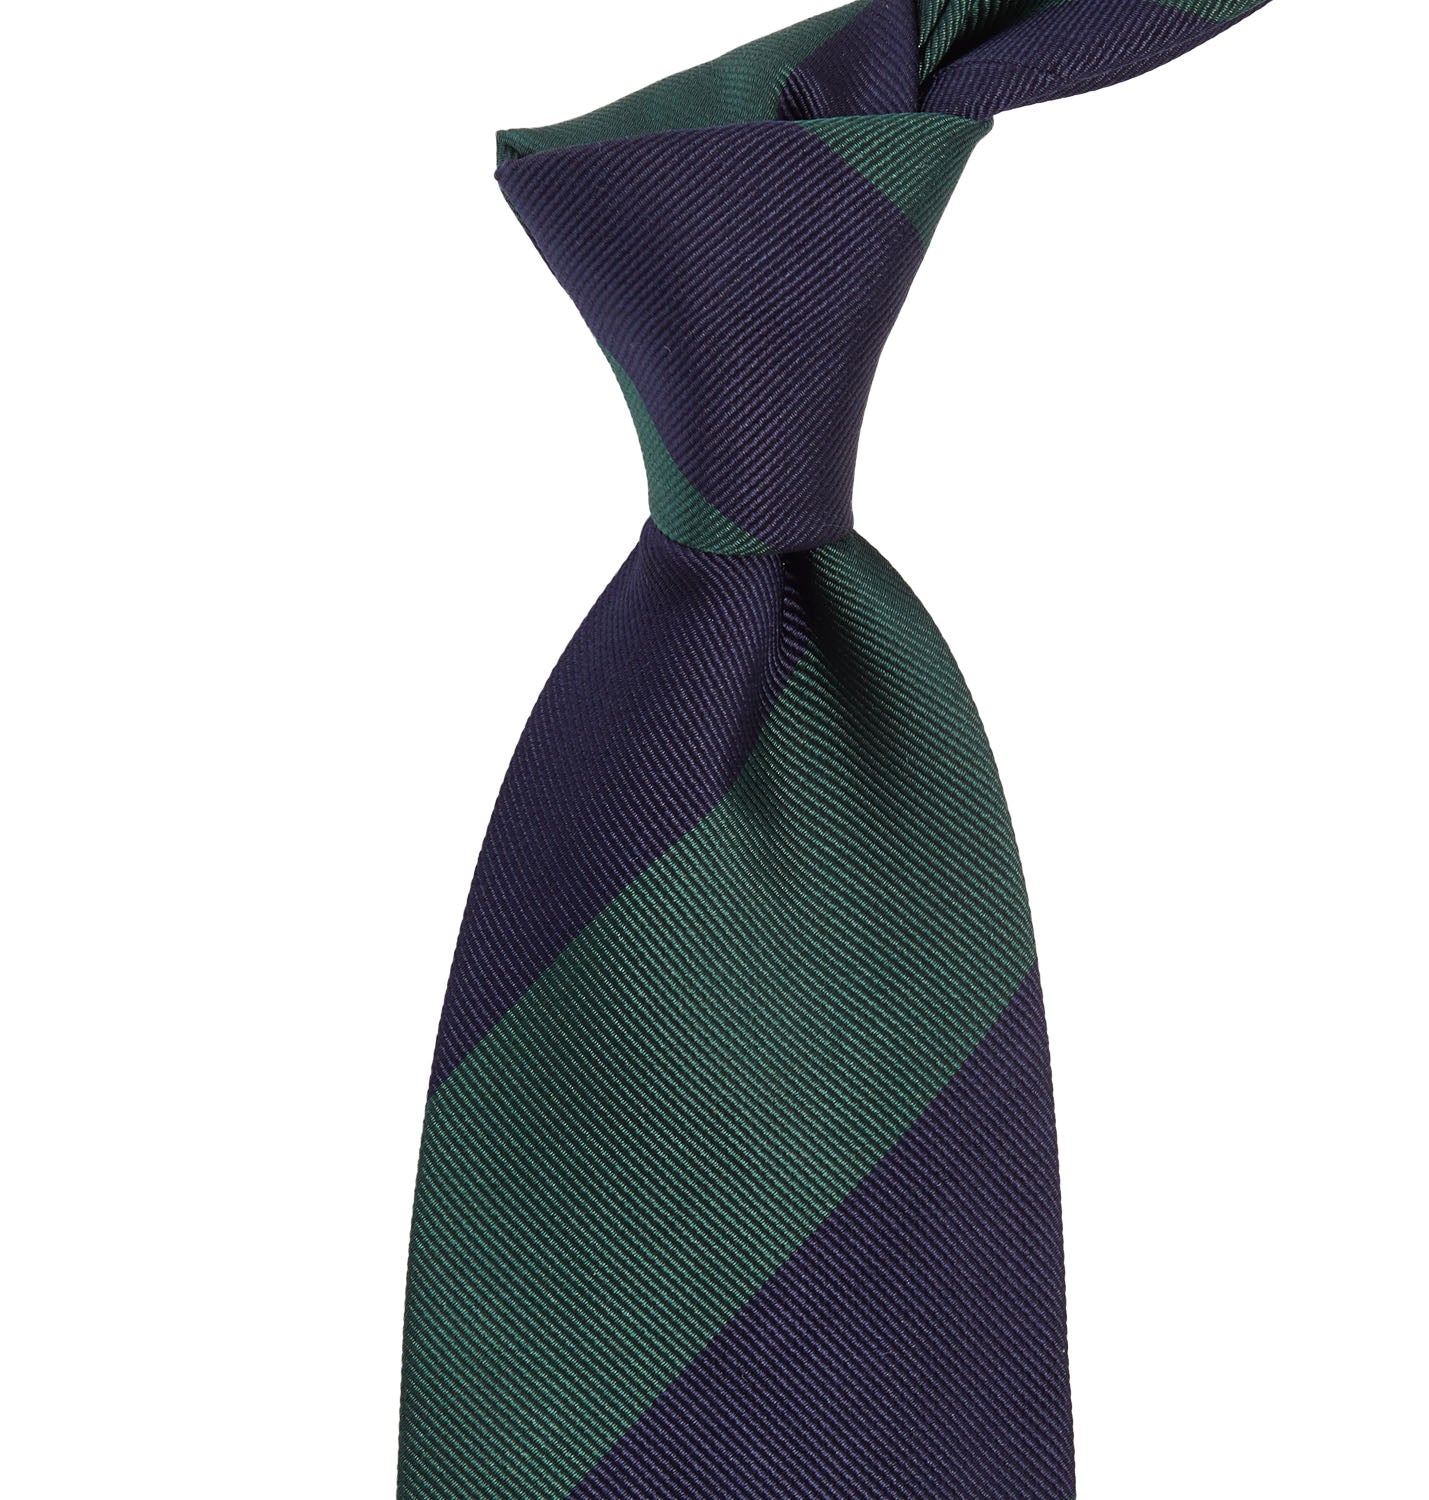 A high-quality KirbyAllison.com Sovereign Grade Midnight/Forest Household Guards (Royal Artillery) tie with green and blue colors on a white background.